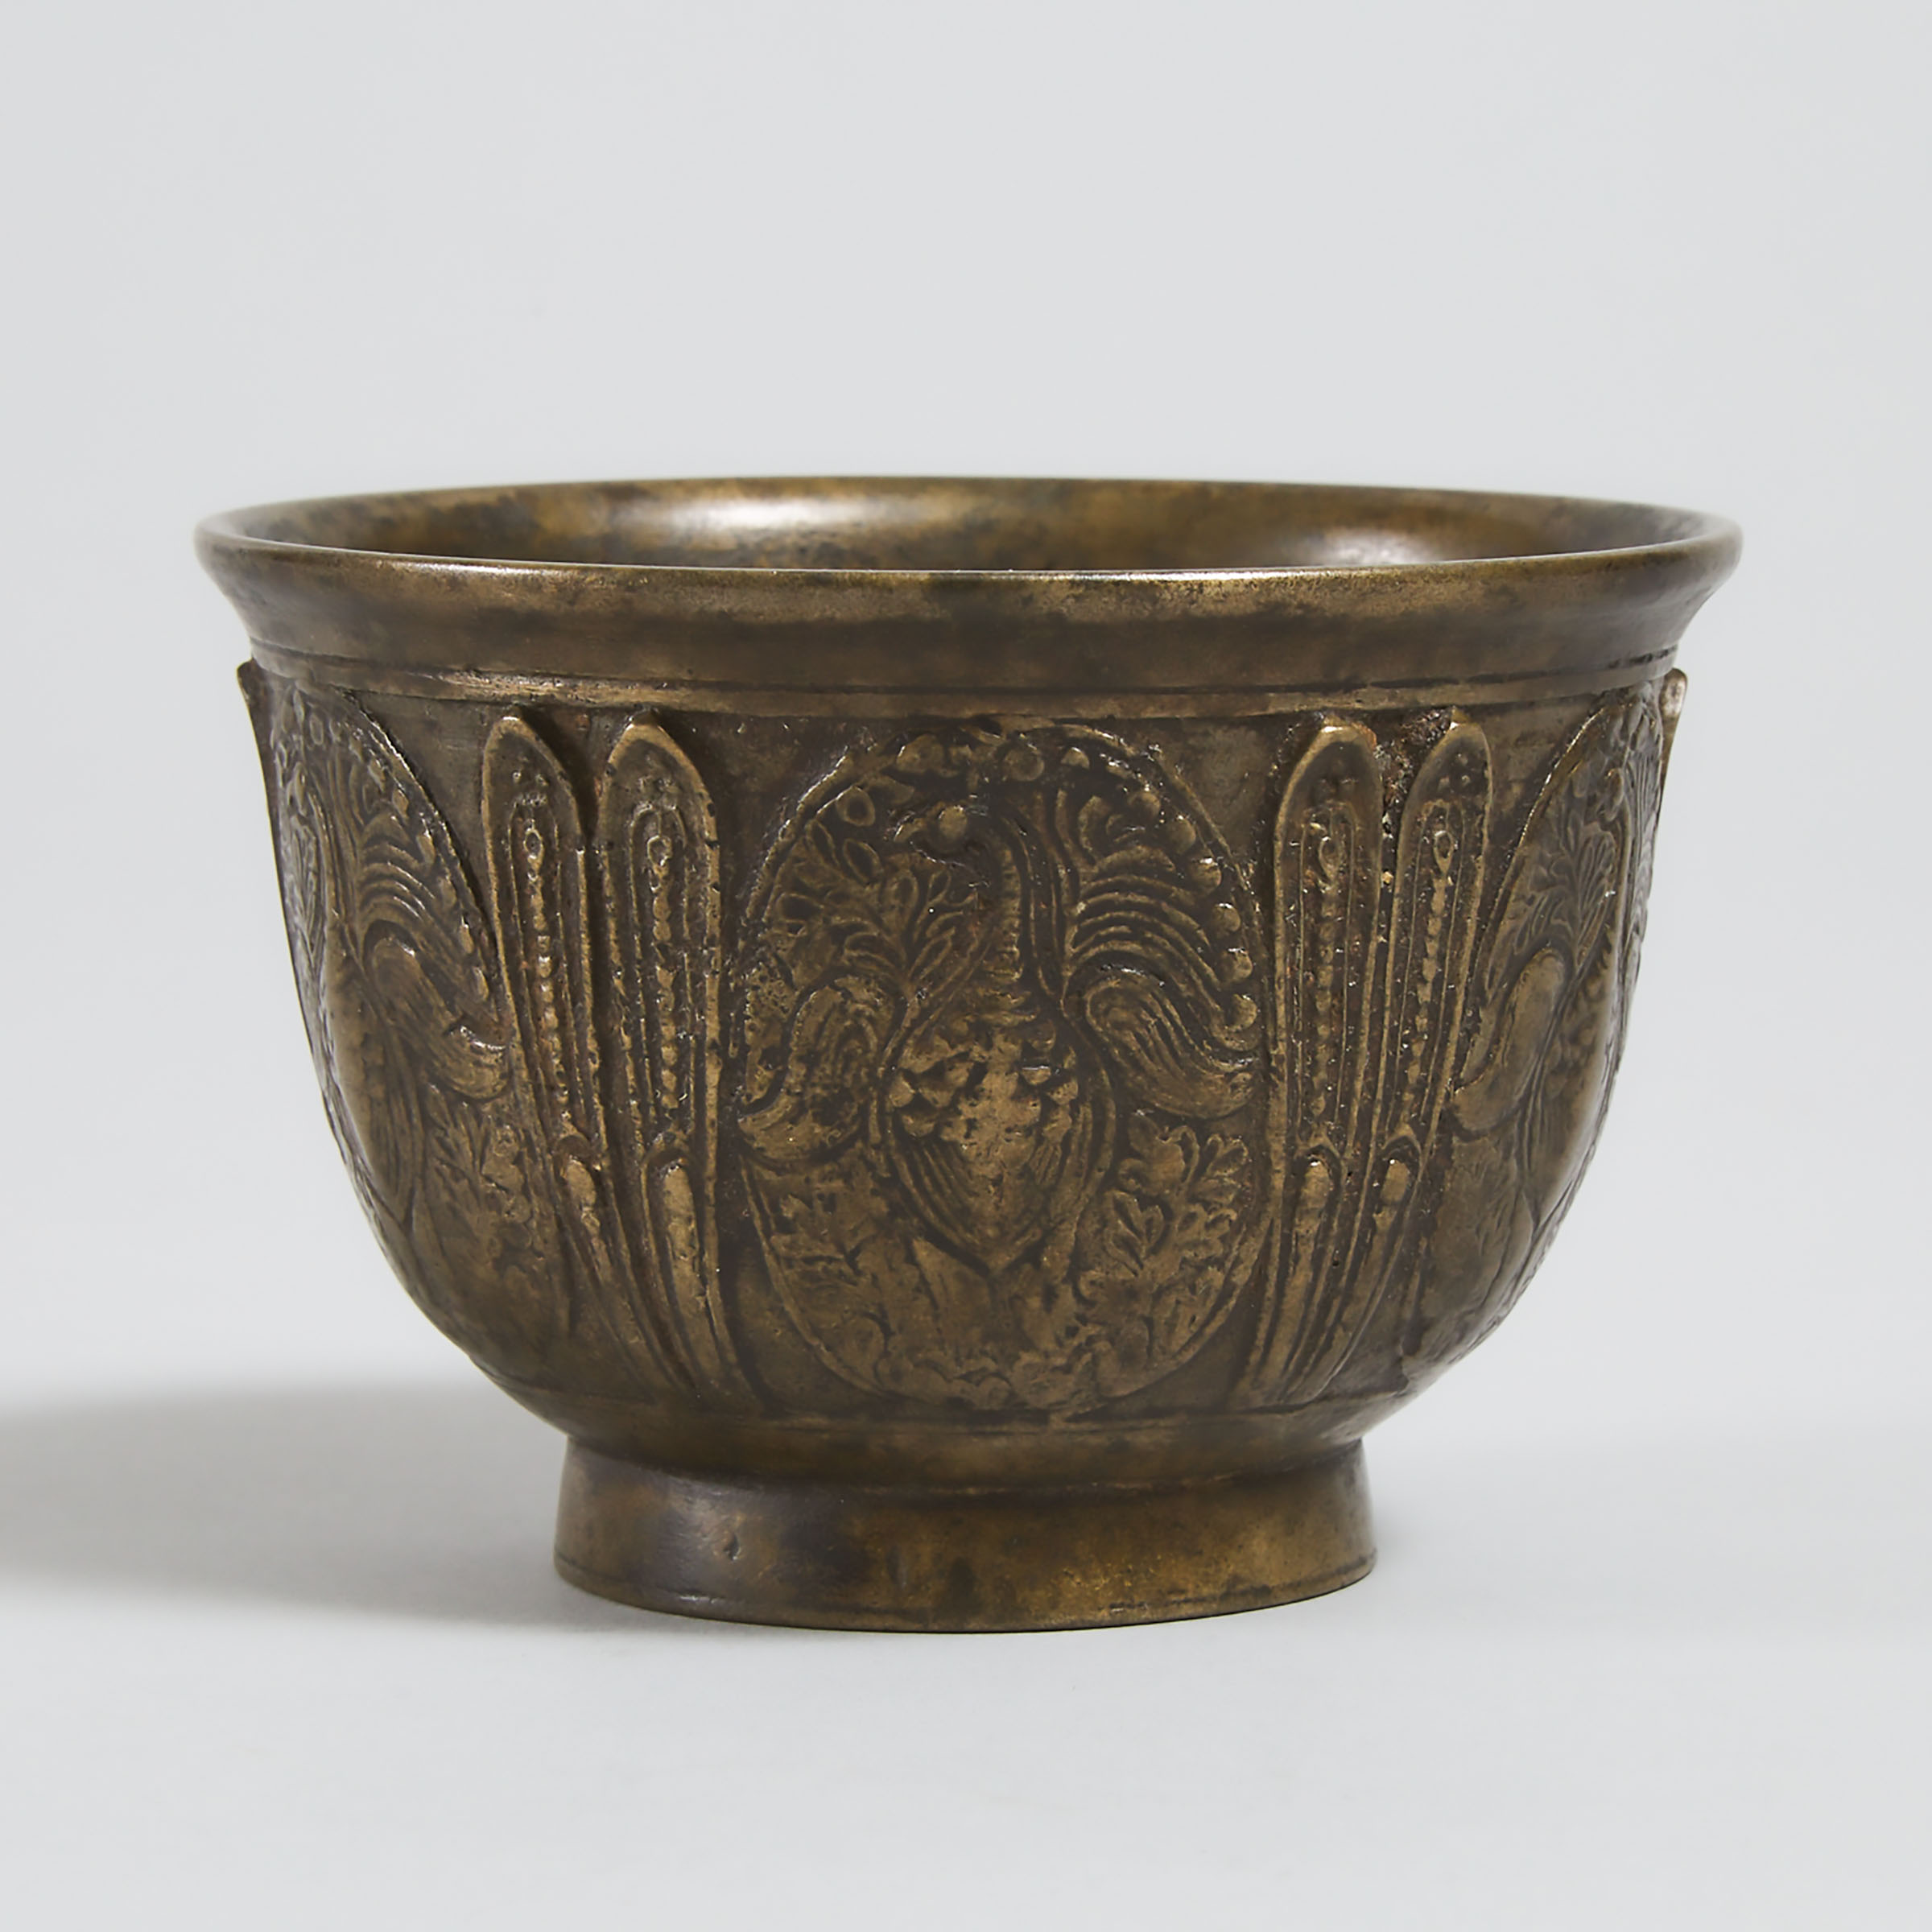 Indian Bronze Hindu Temple Offering Bowl, 18th/19th century